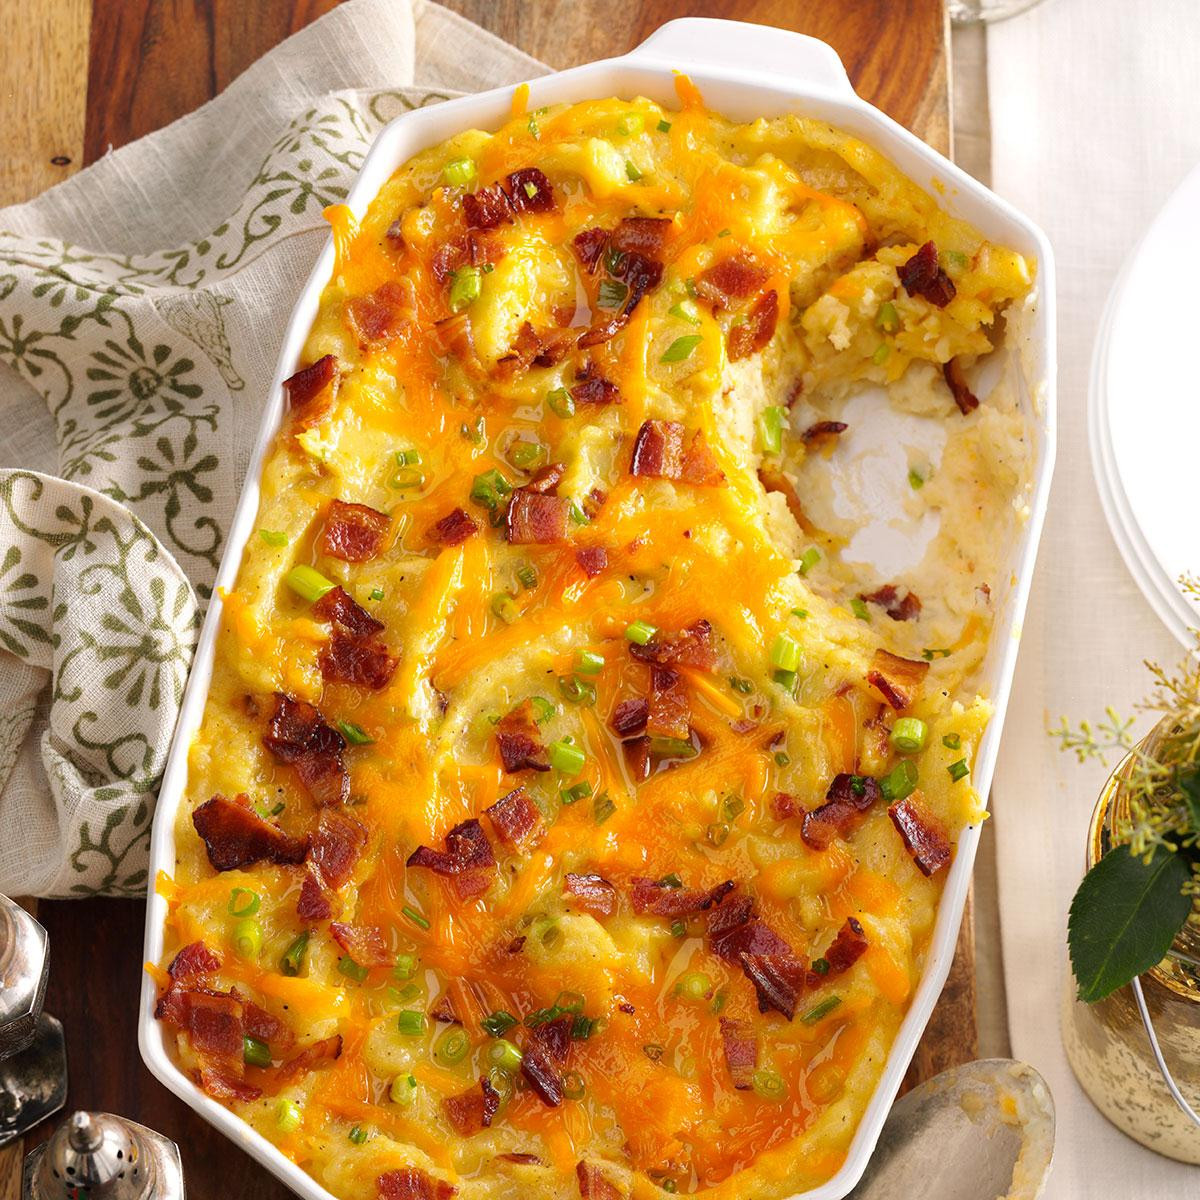 Side Dishes For Christmas Potluck
 Twice Baked Cheddar Potato Casserole Recipe